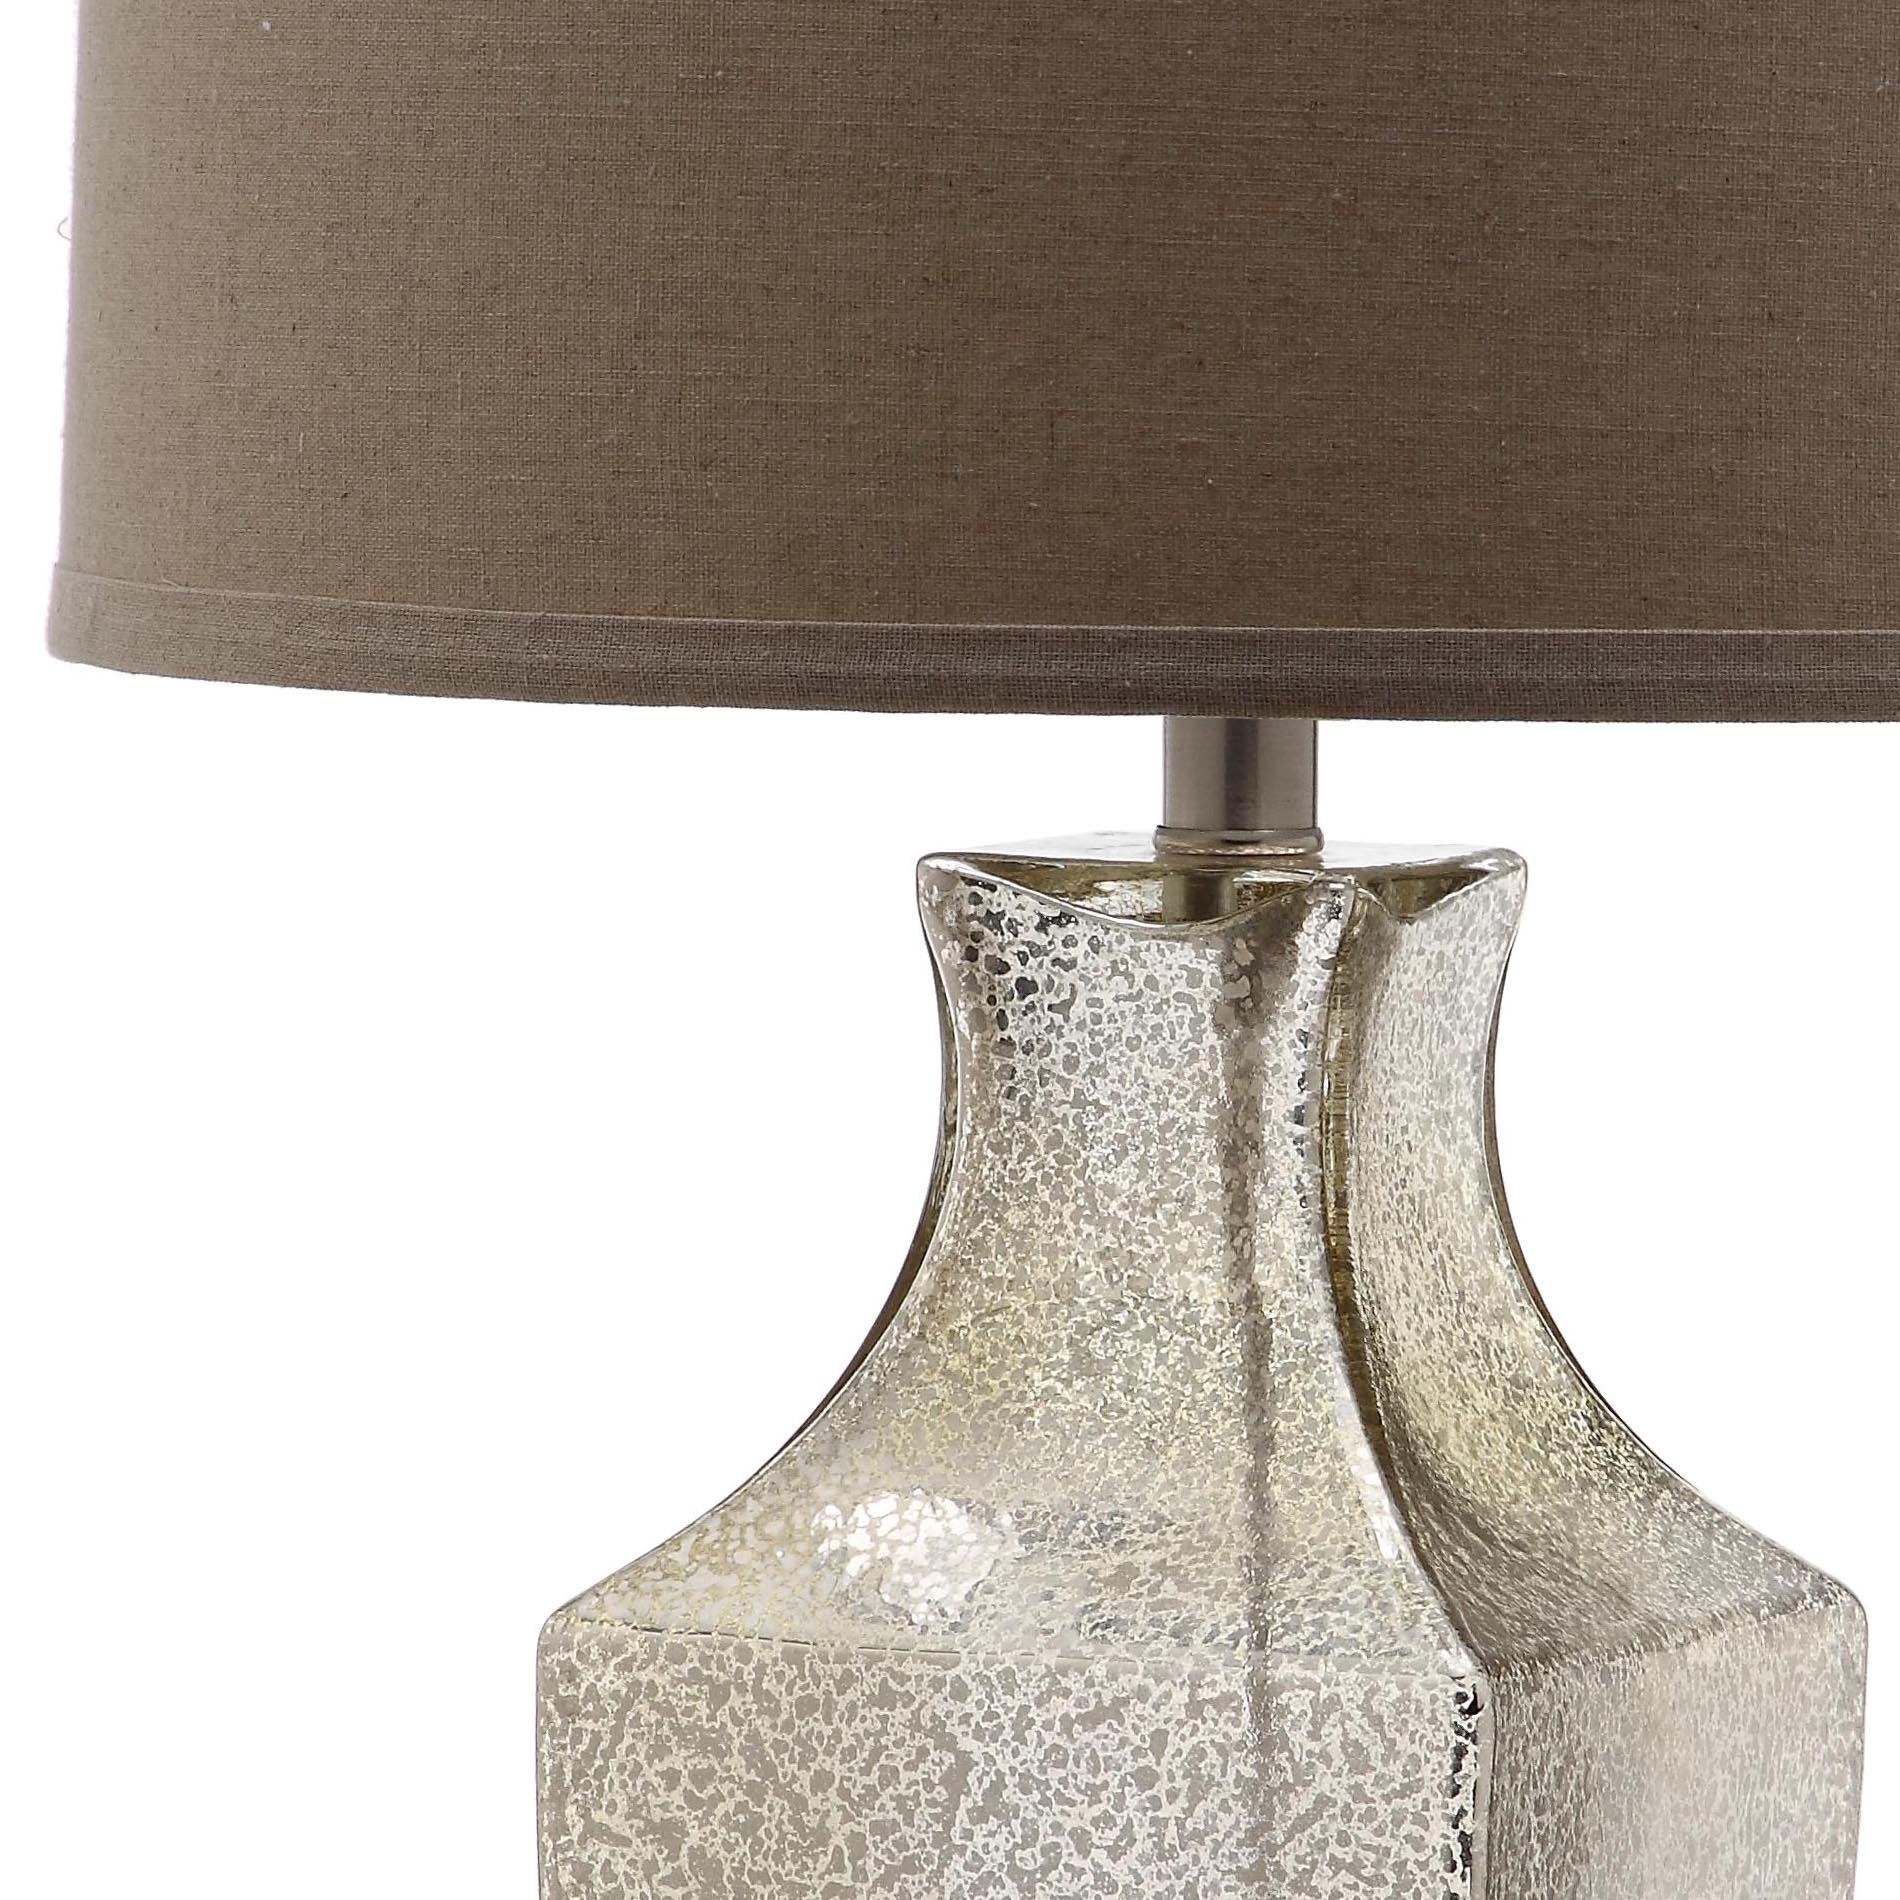 Glass 29-Inch H Bottom Table Lamp - Ivory/Silver - Arlo Home - Image 3